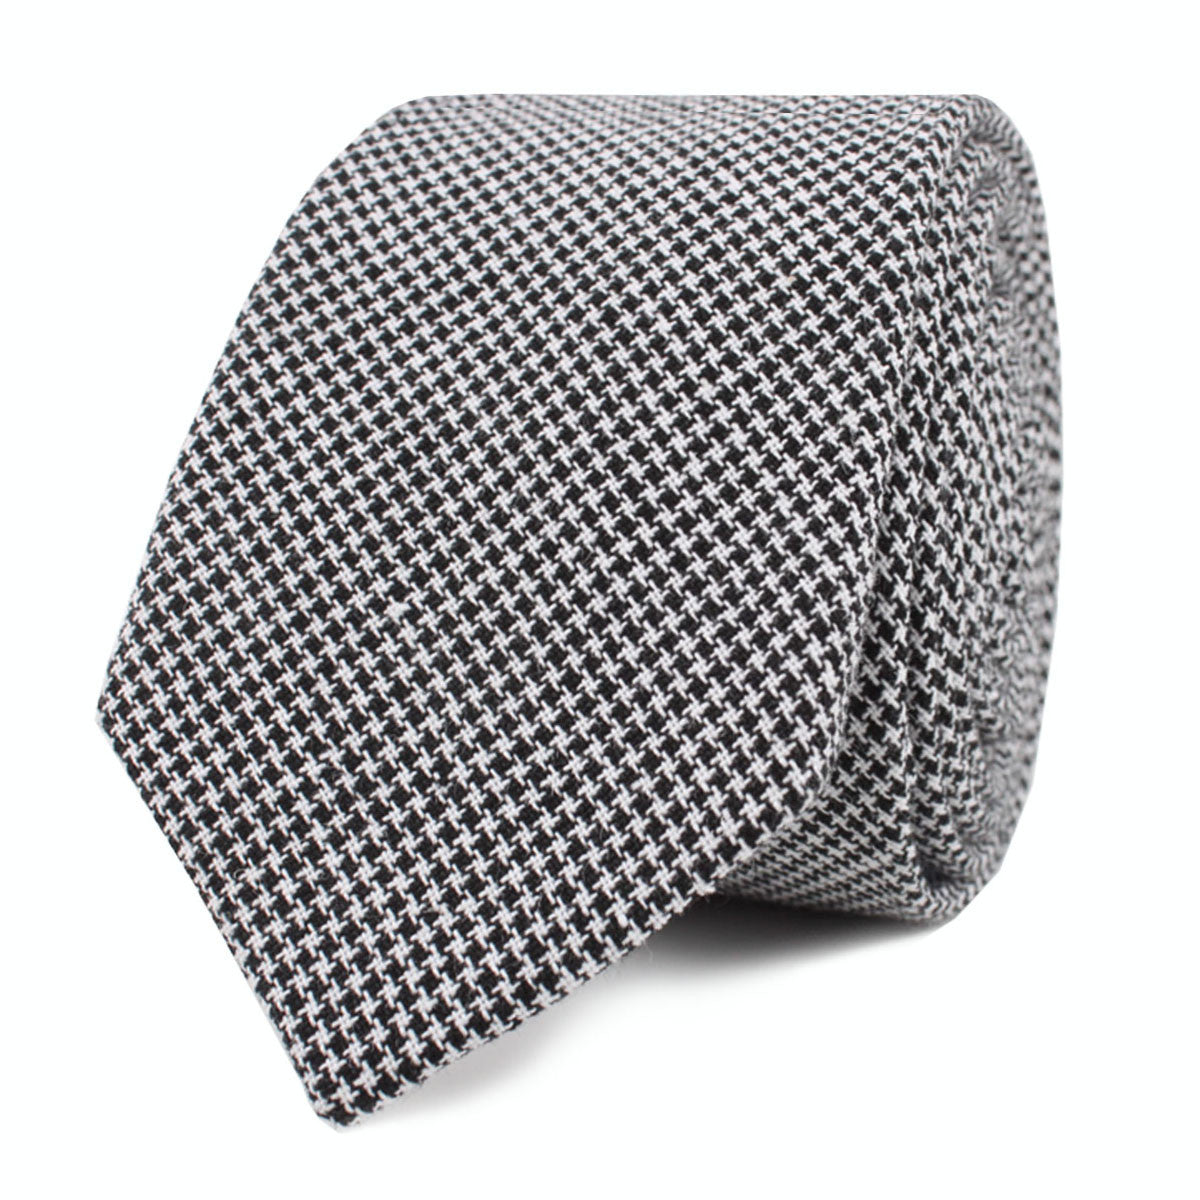 Black & White Houndstooth Cotton Fabric C164 Skinny Tie Front Roll